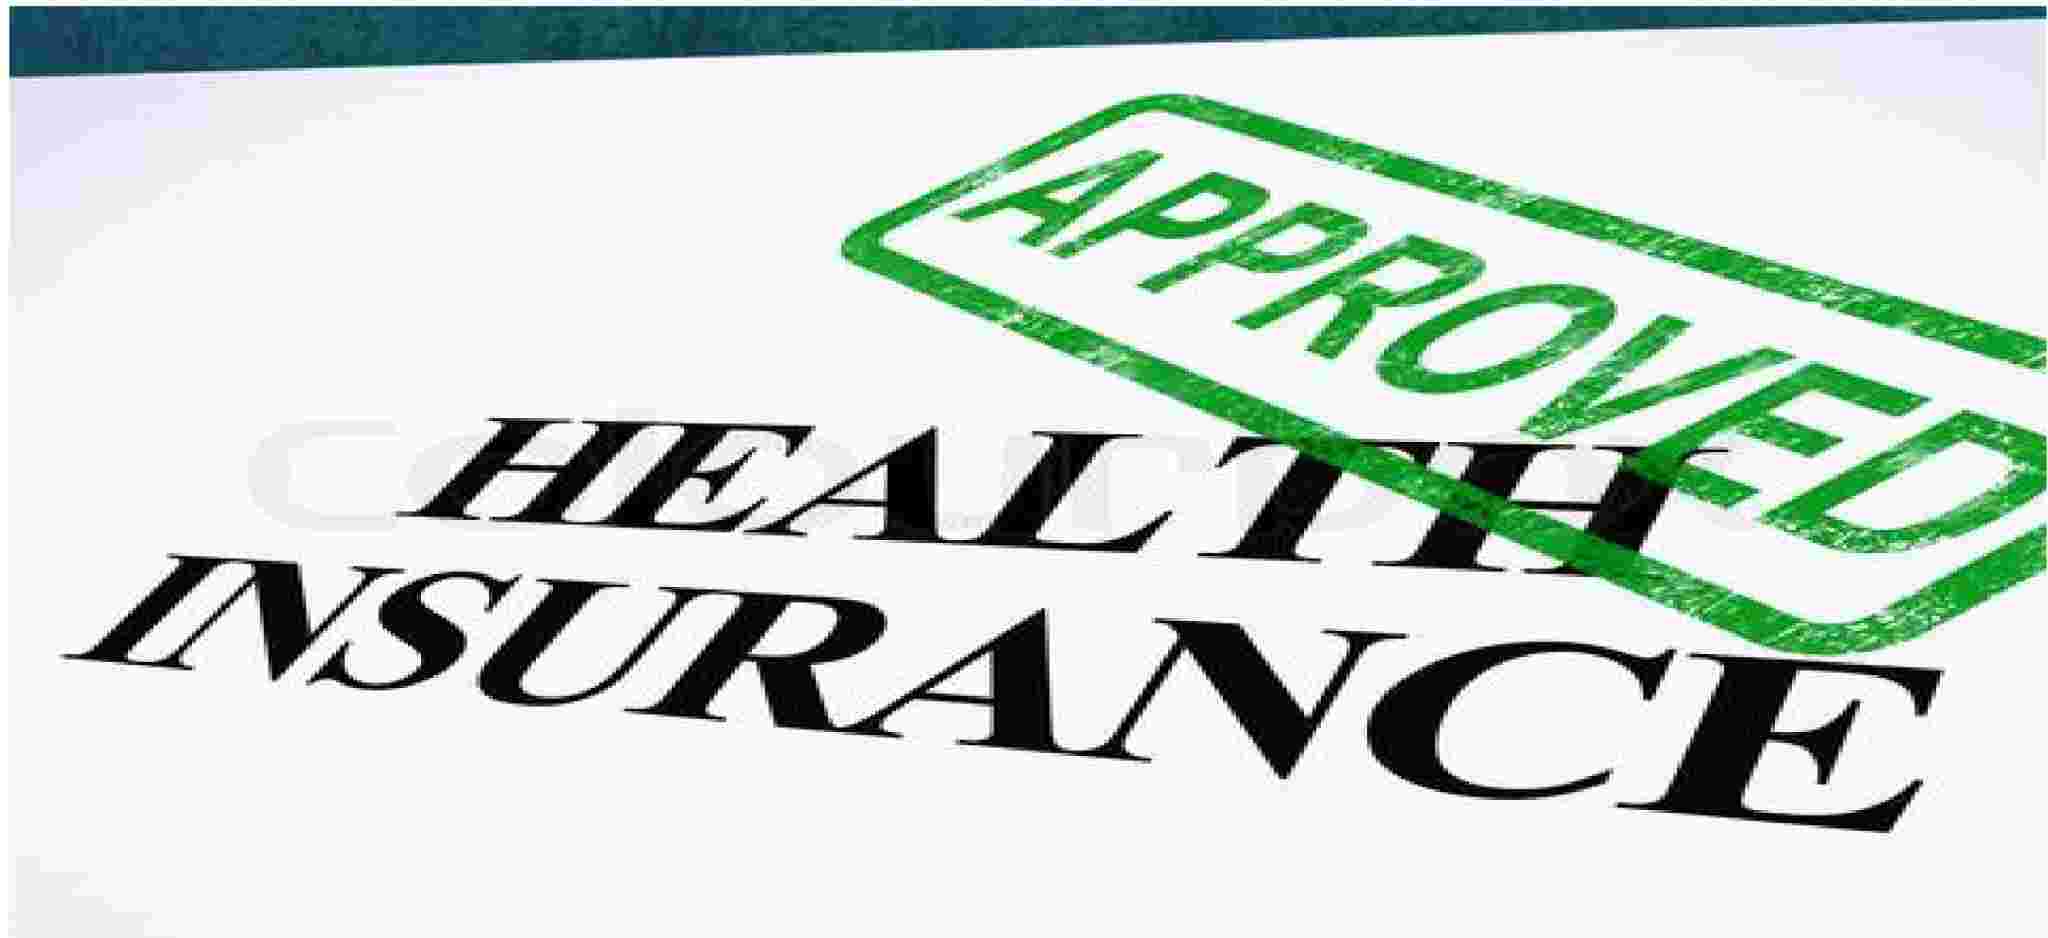 Best Deals Online: Health Insurance Quotes For Americans